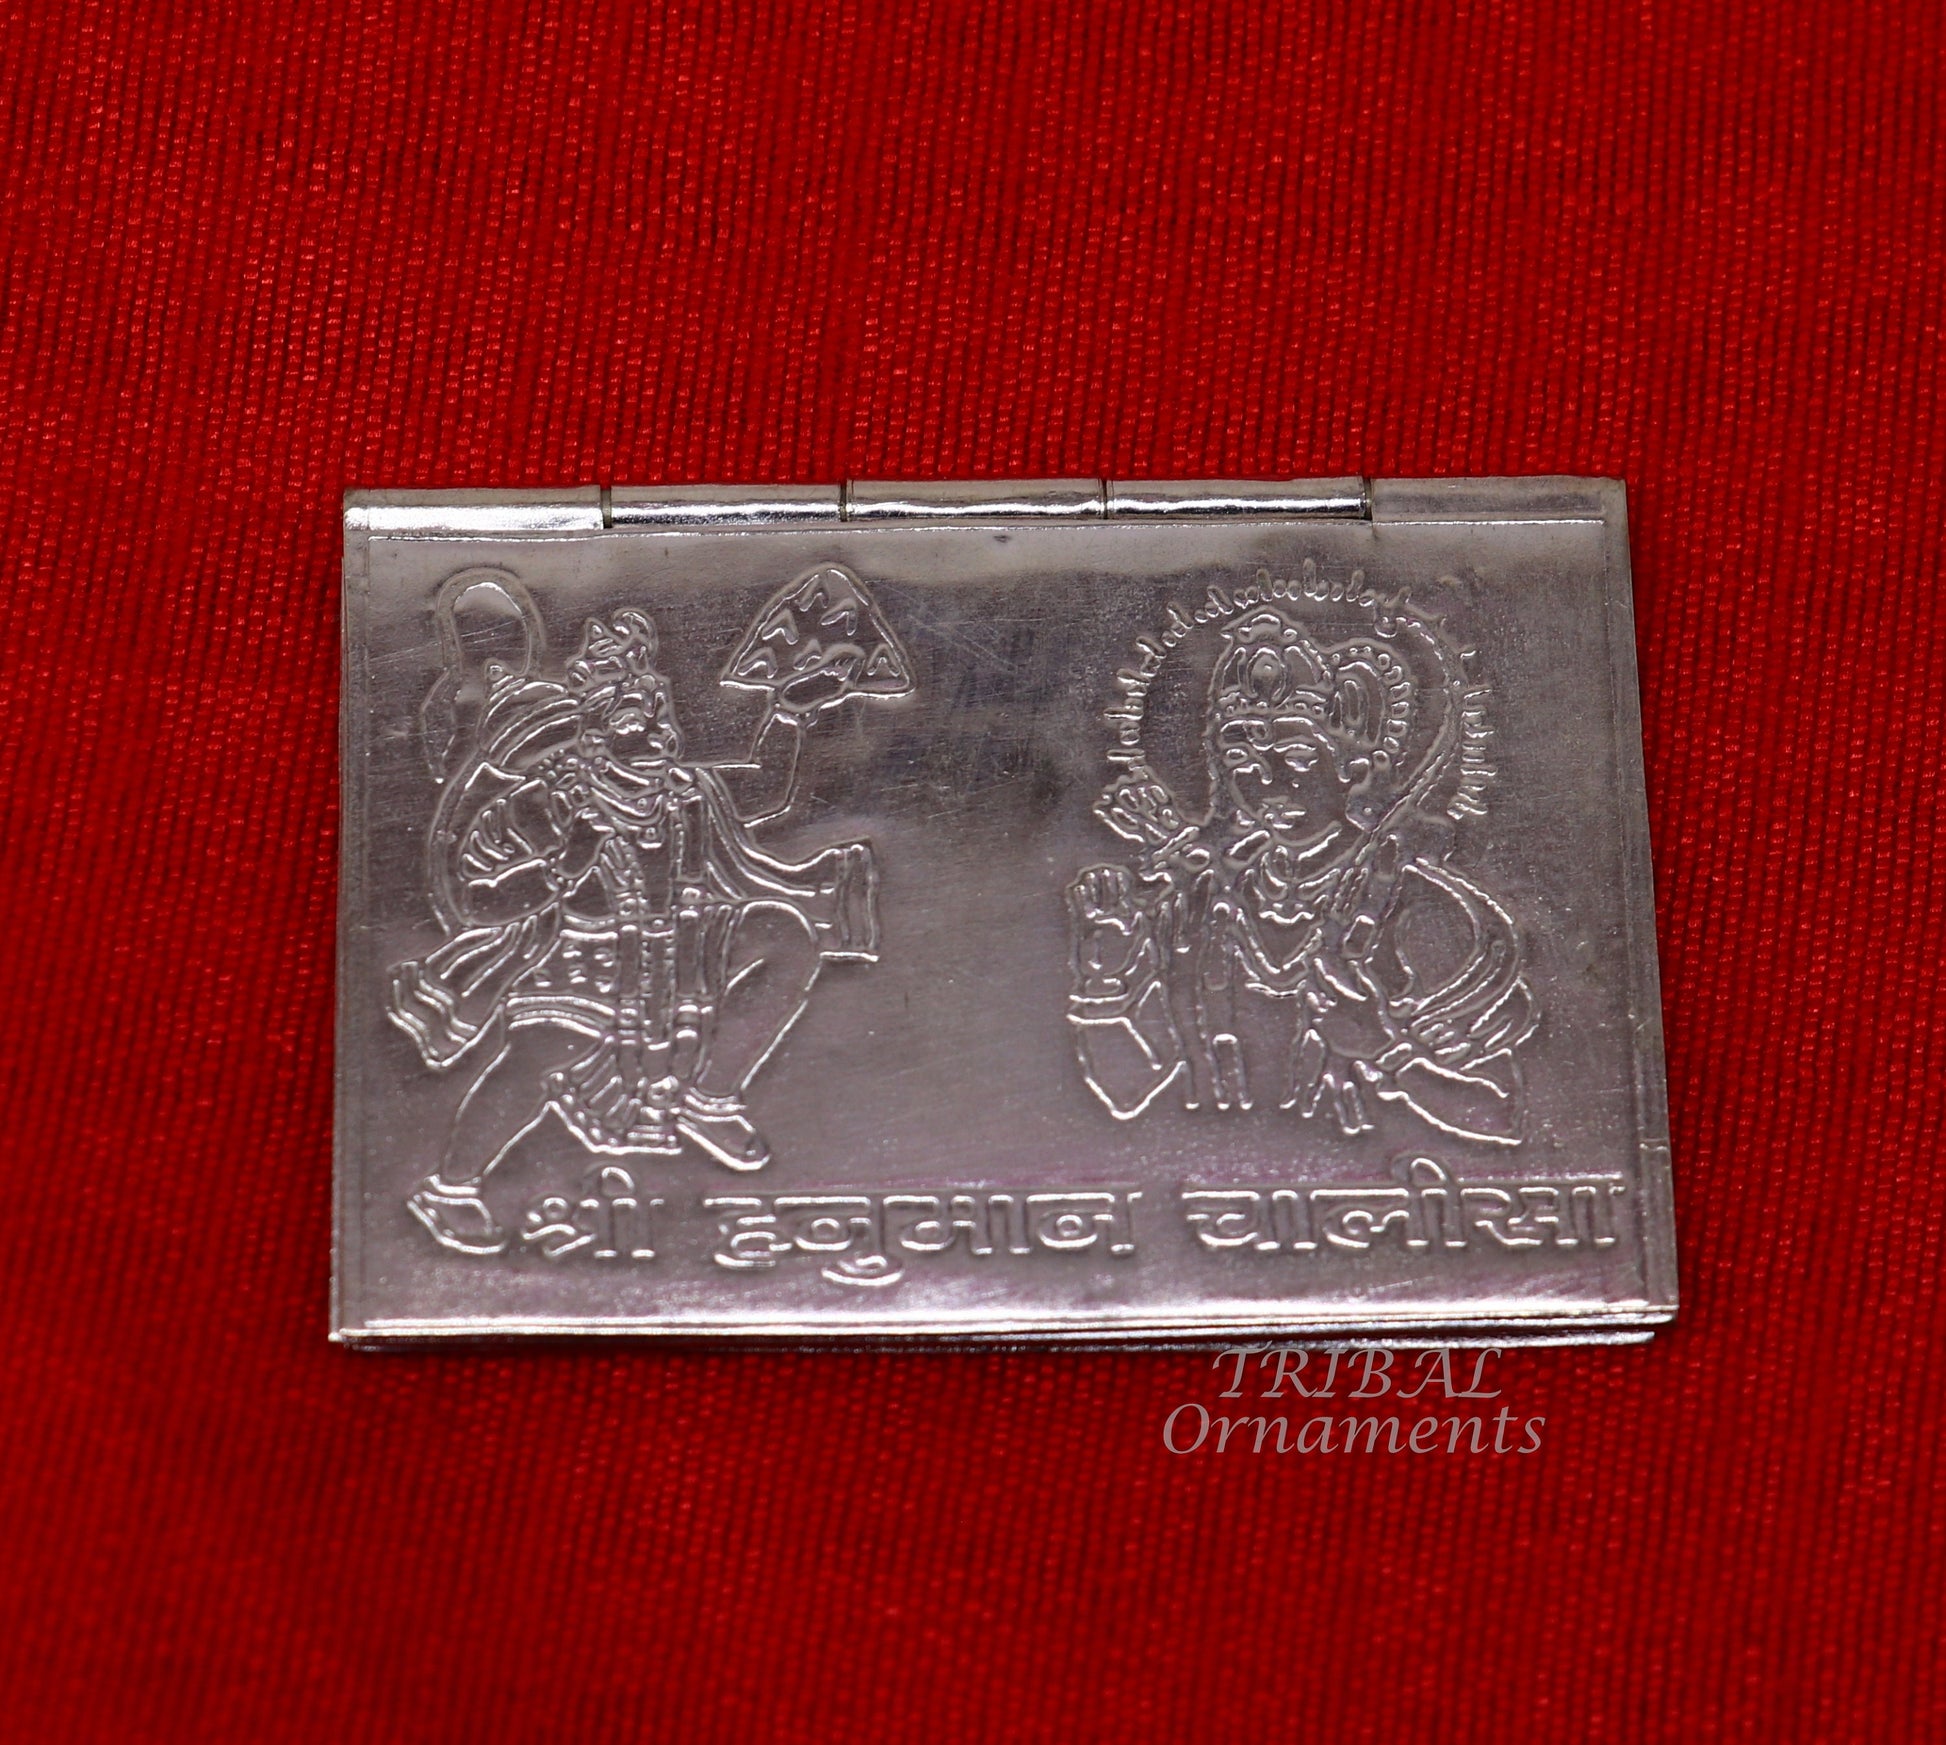 925 sterling silver handmade complete Shree Hanuman Chalisa with Arti small mini 4 page book, amazing puja article from India su833 - TRIBAL ORNAMENTS